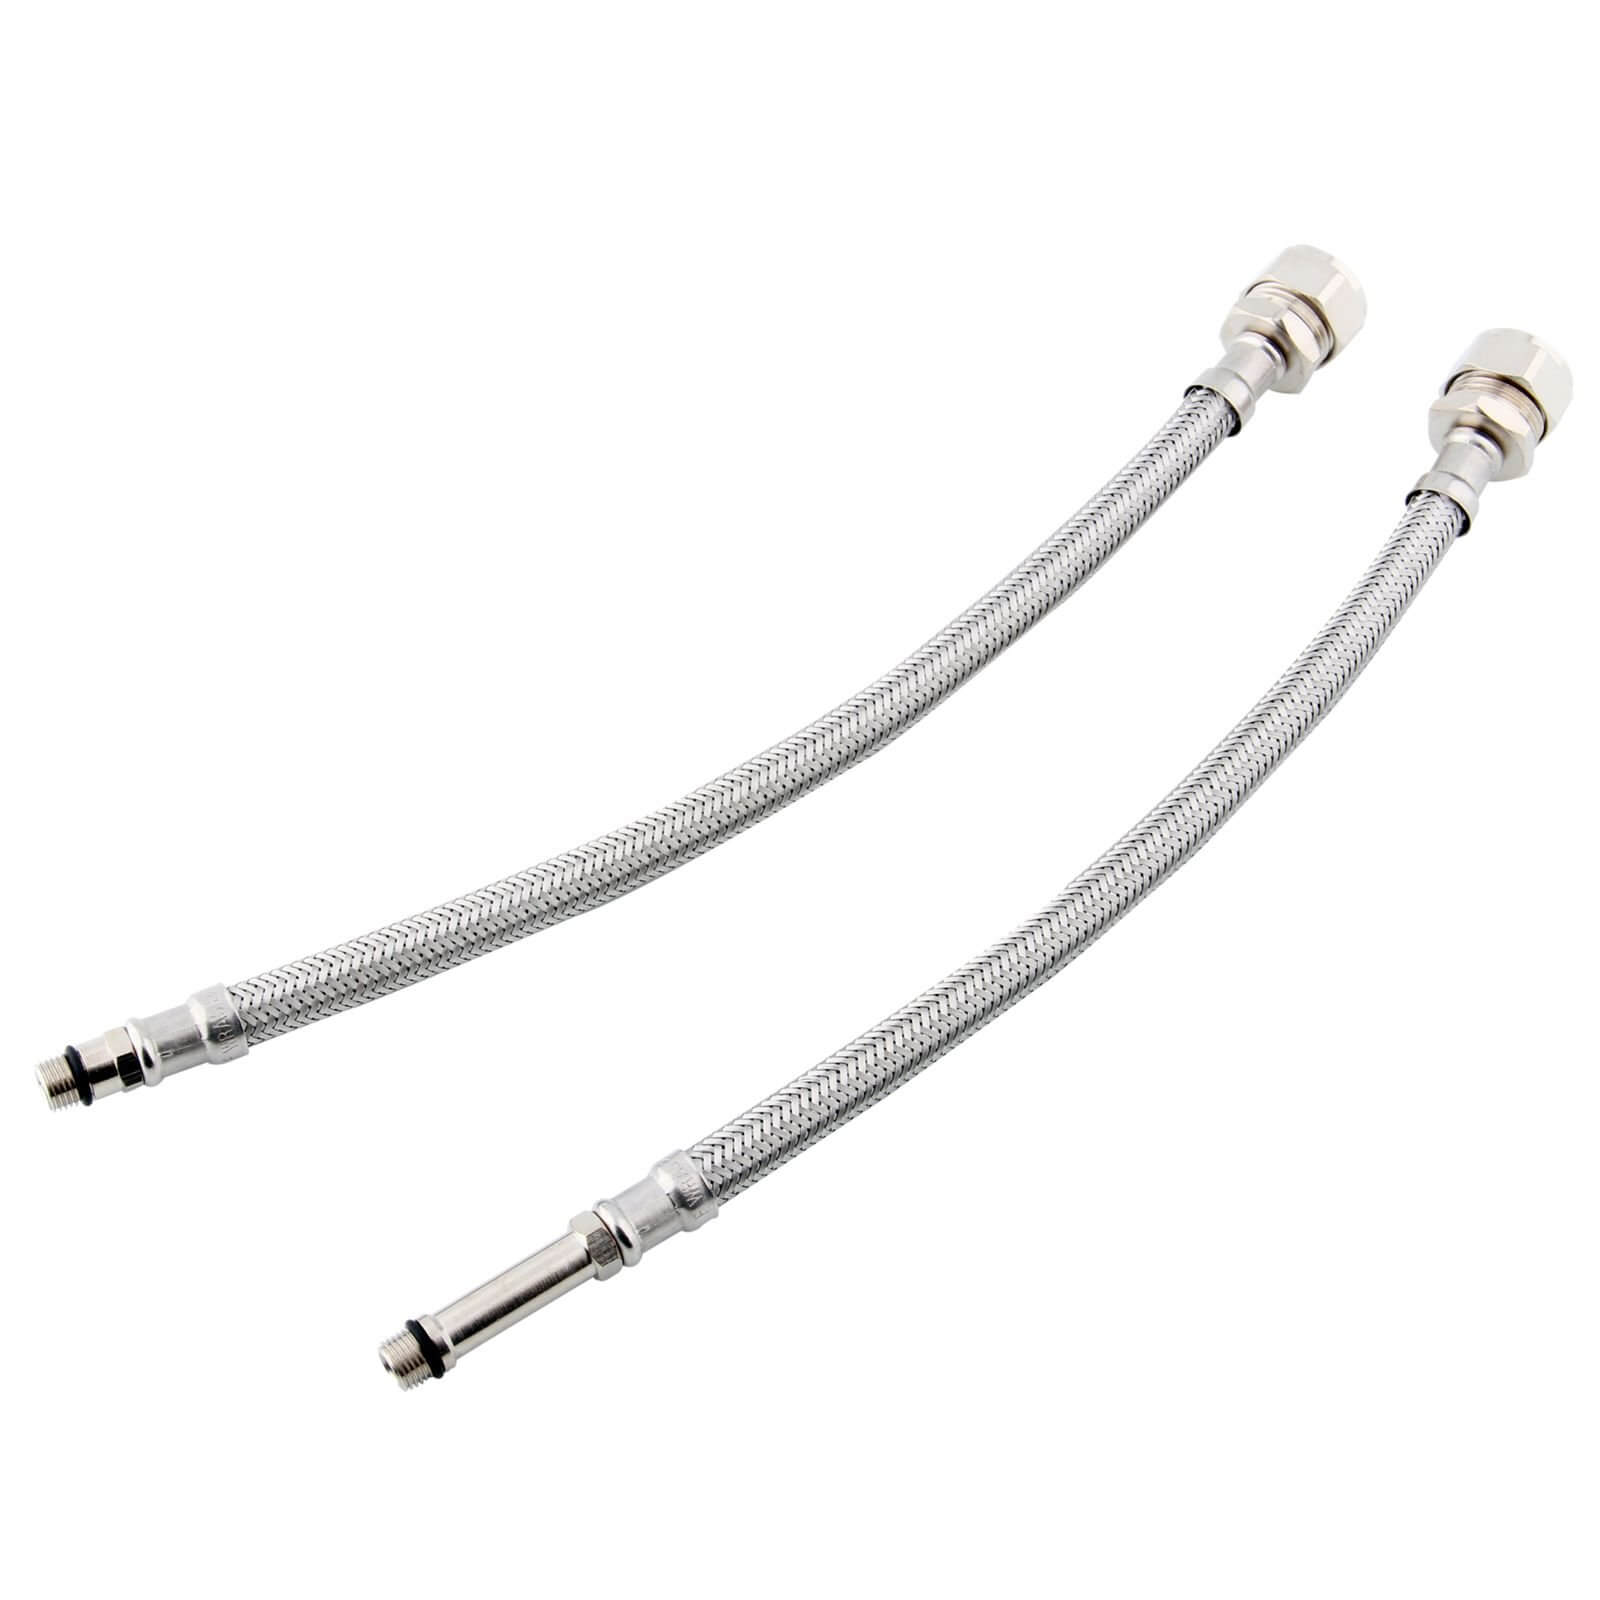 Kinetic Flexible MonoB Tap Connector - 15mm x M10 x 300mm - 2 Pack - WRAS Approved